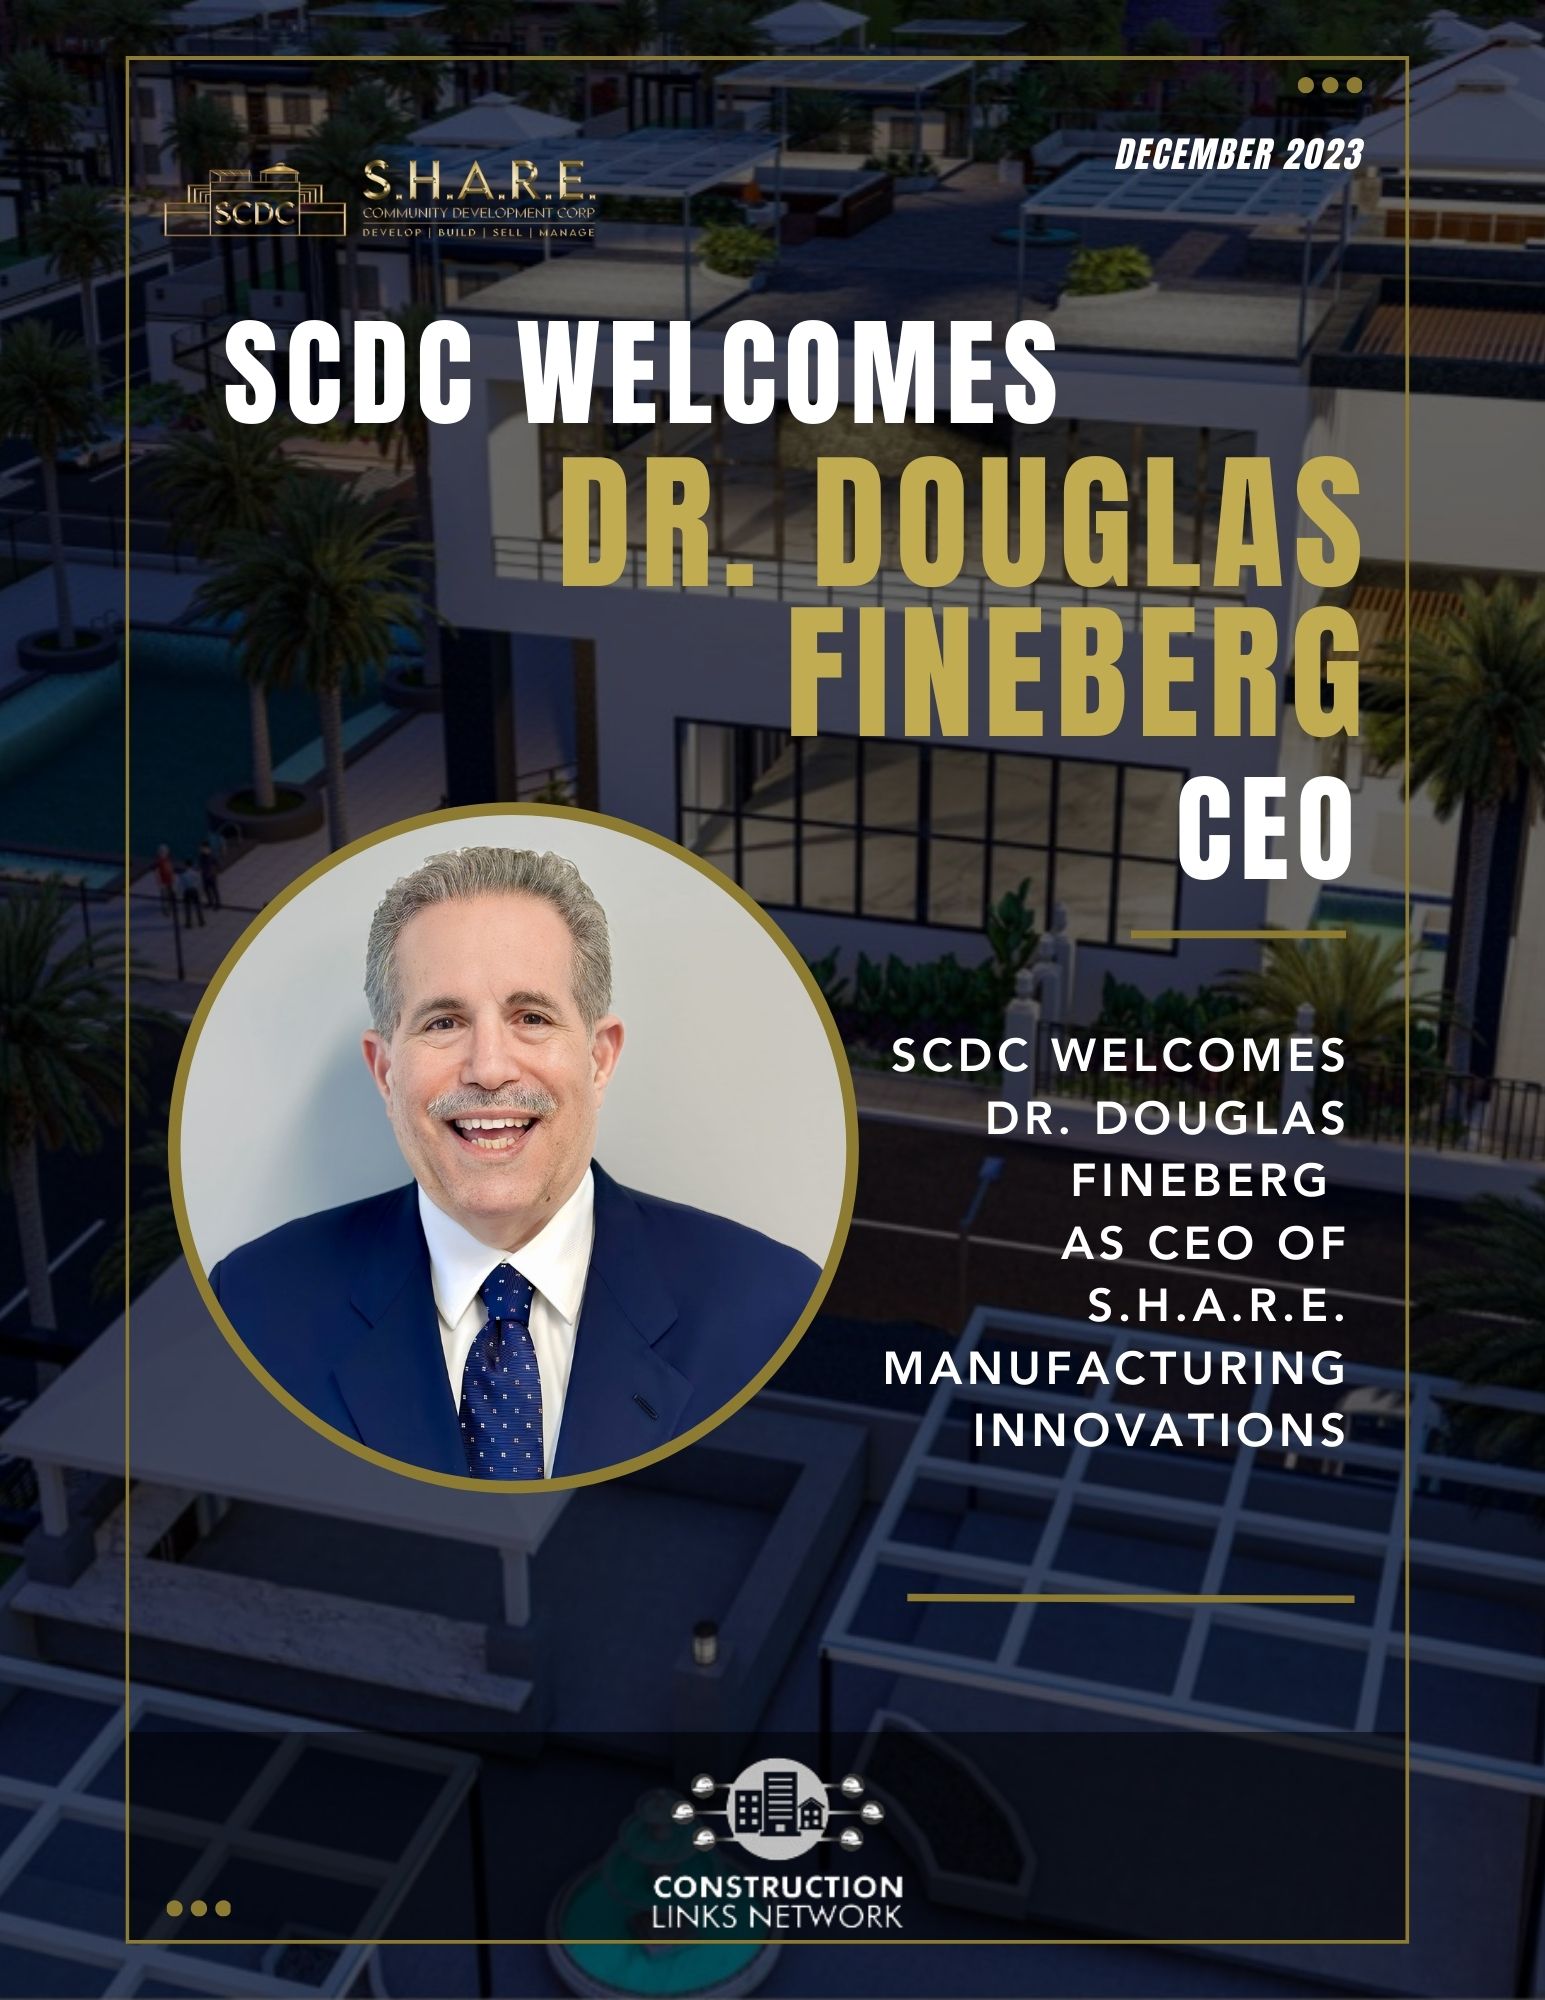 S.H.A.R.E. Community Development Corp Hires Dr. Douglas Fineberg as CEO Of S.H.A.R.E. Manufacturing Innovations